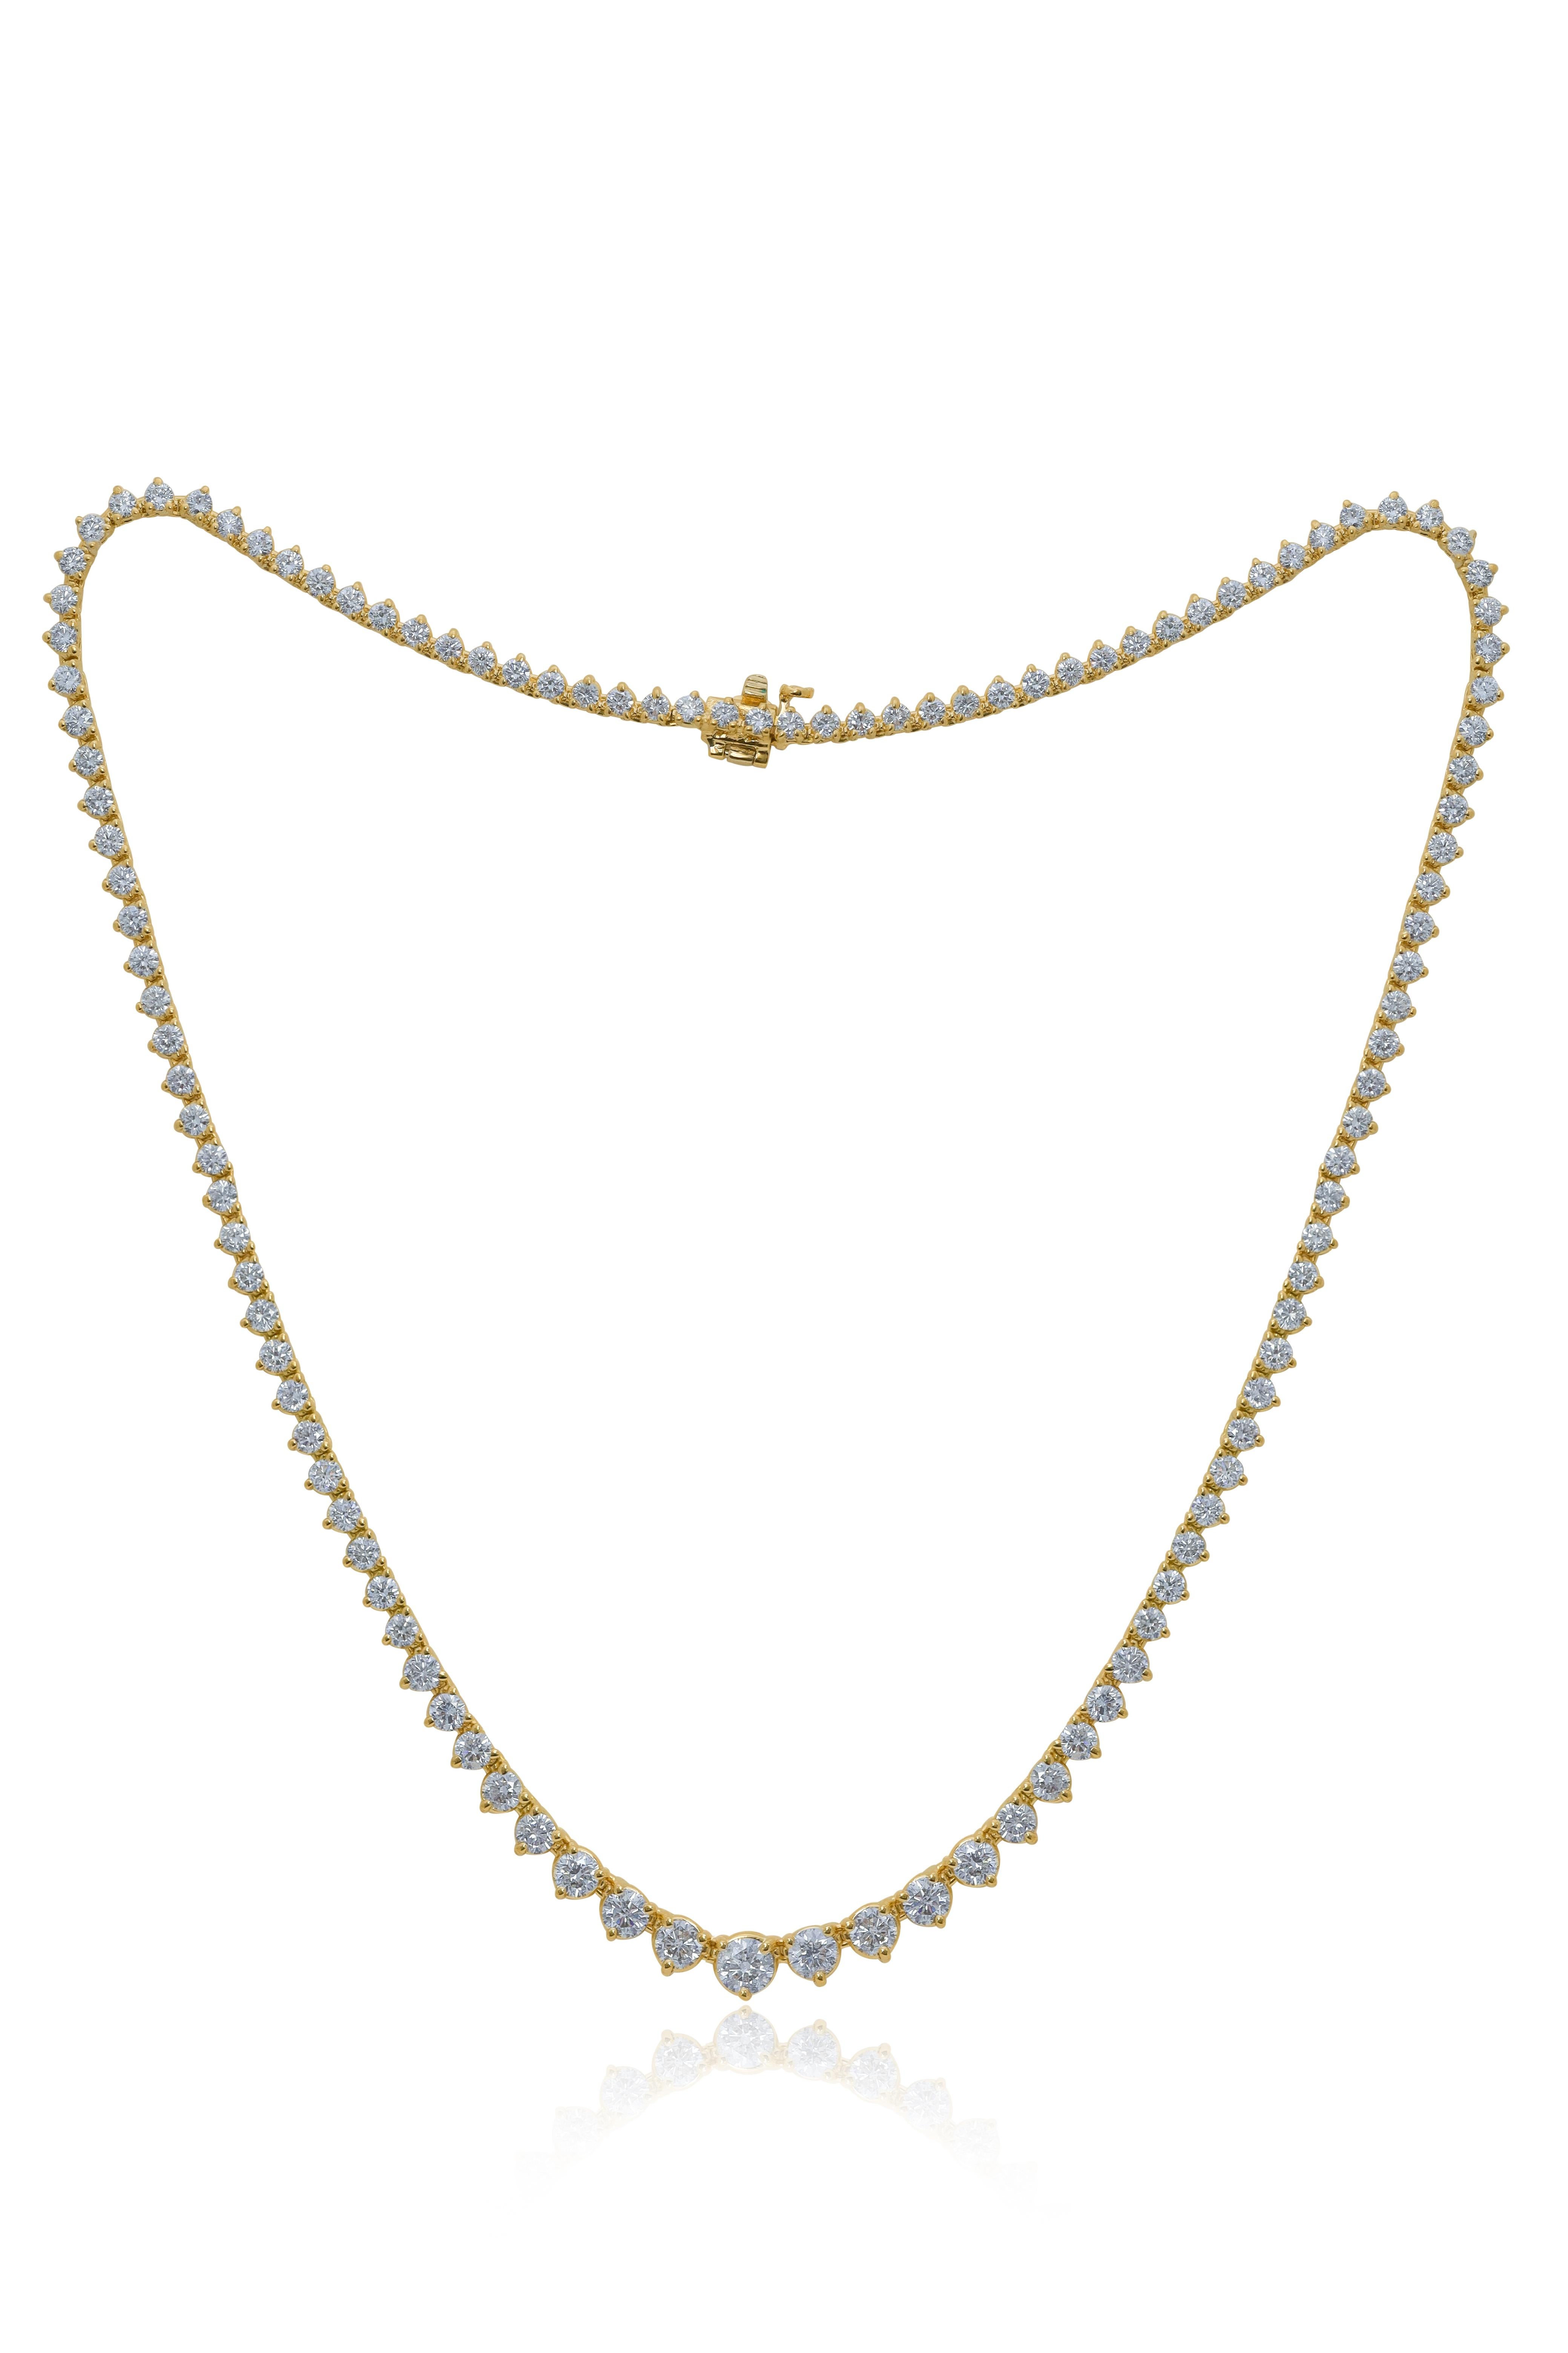 Cushion Cut Diana M. 18kt Yellow Gold Graduated Reviera Tennis Necklace Featuring 11.15 cts  For Sale